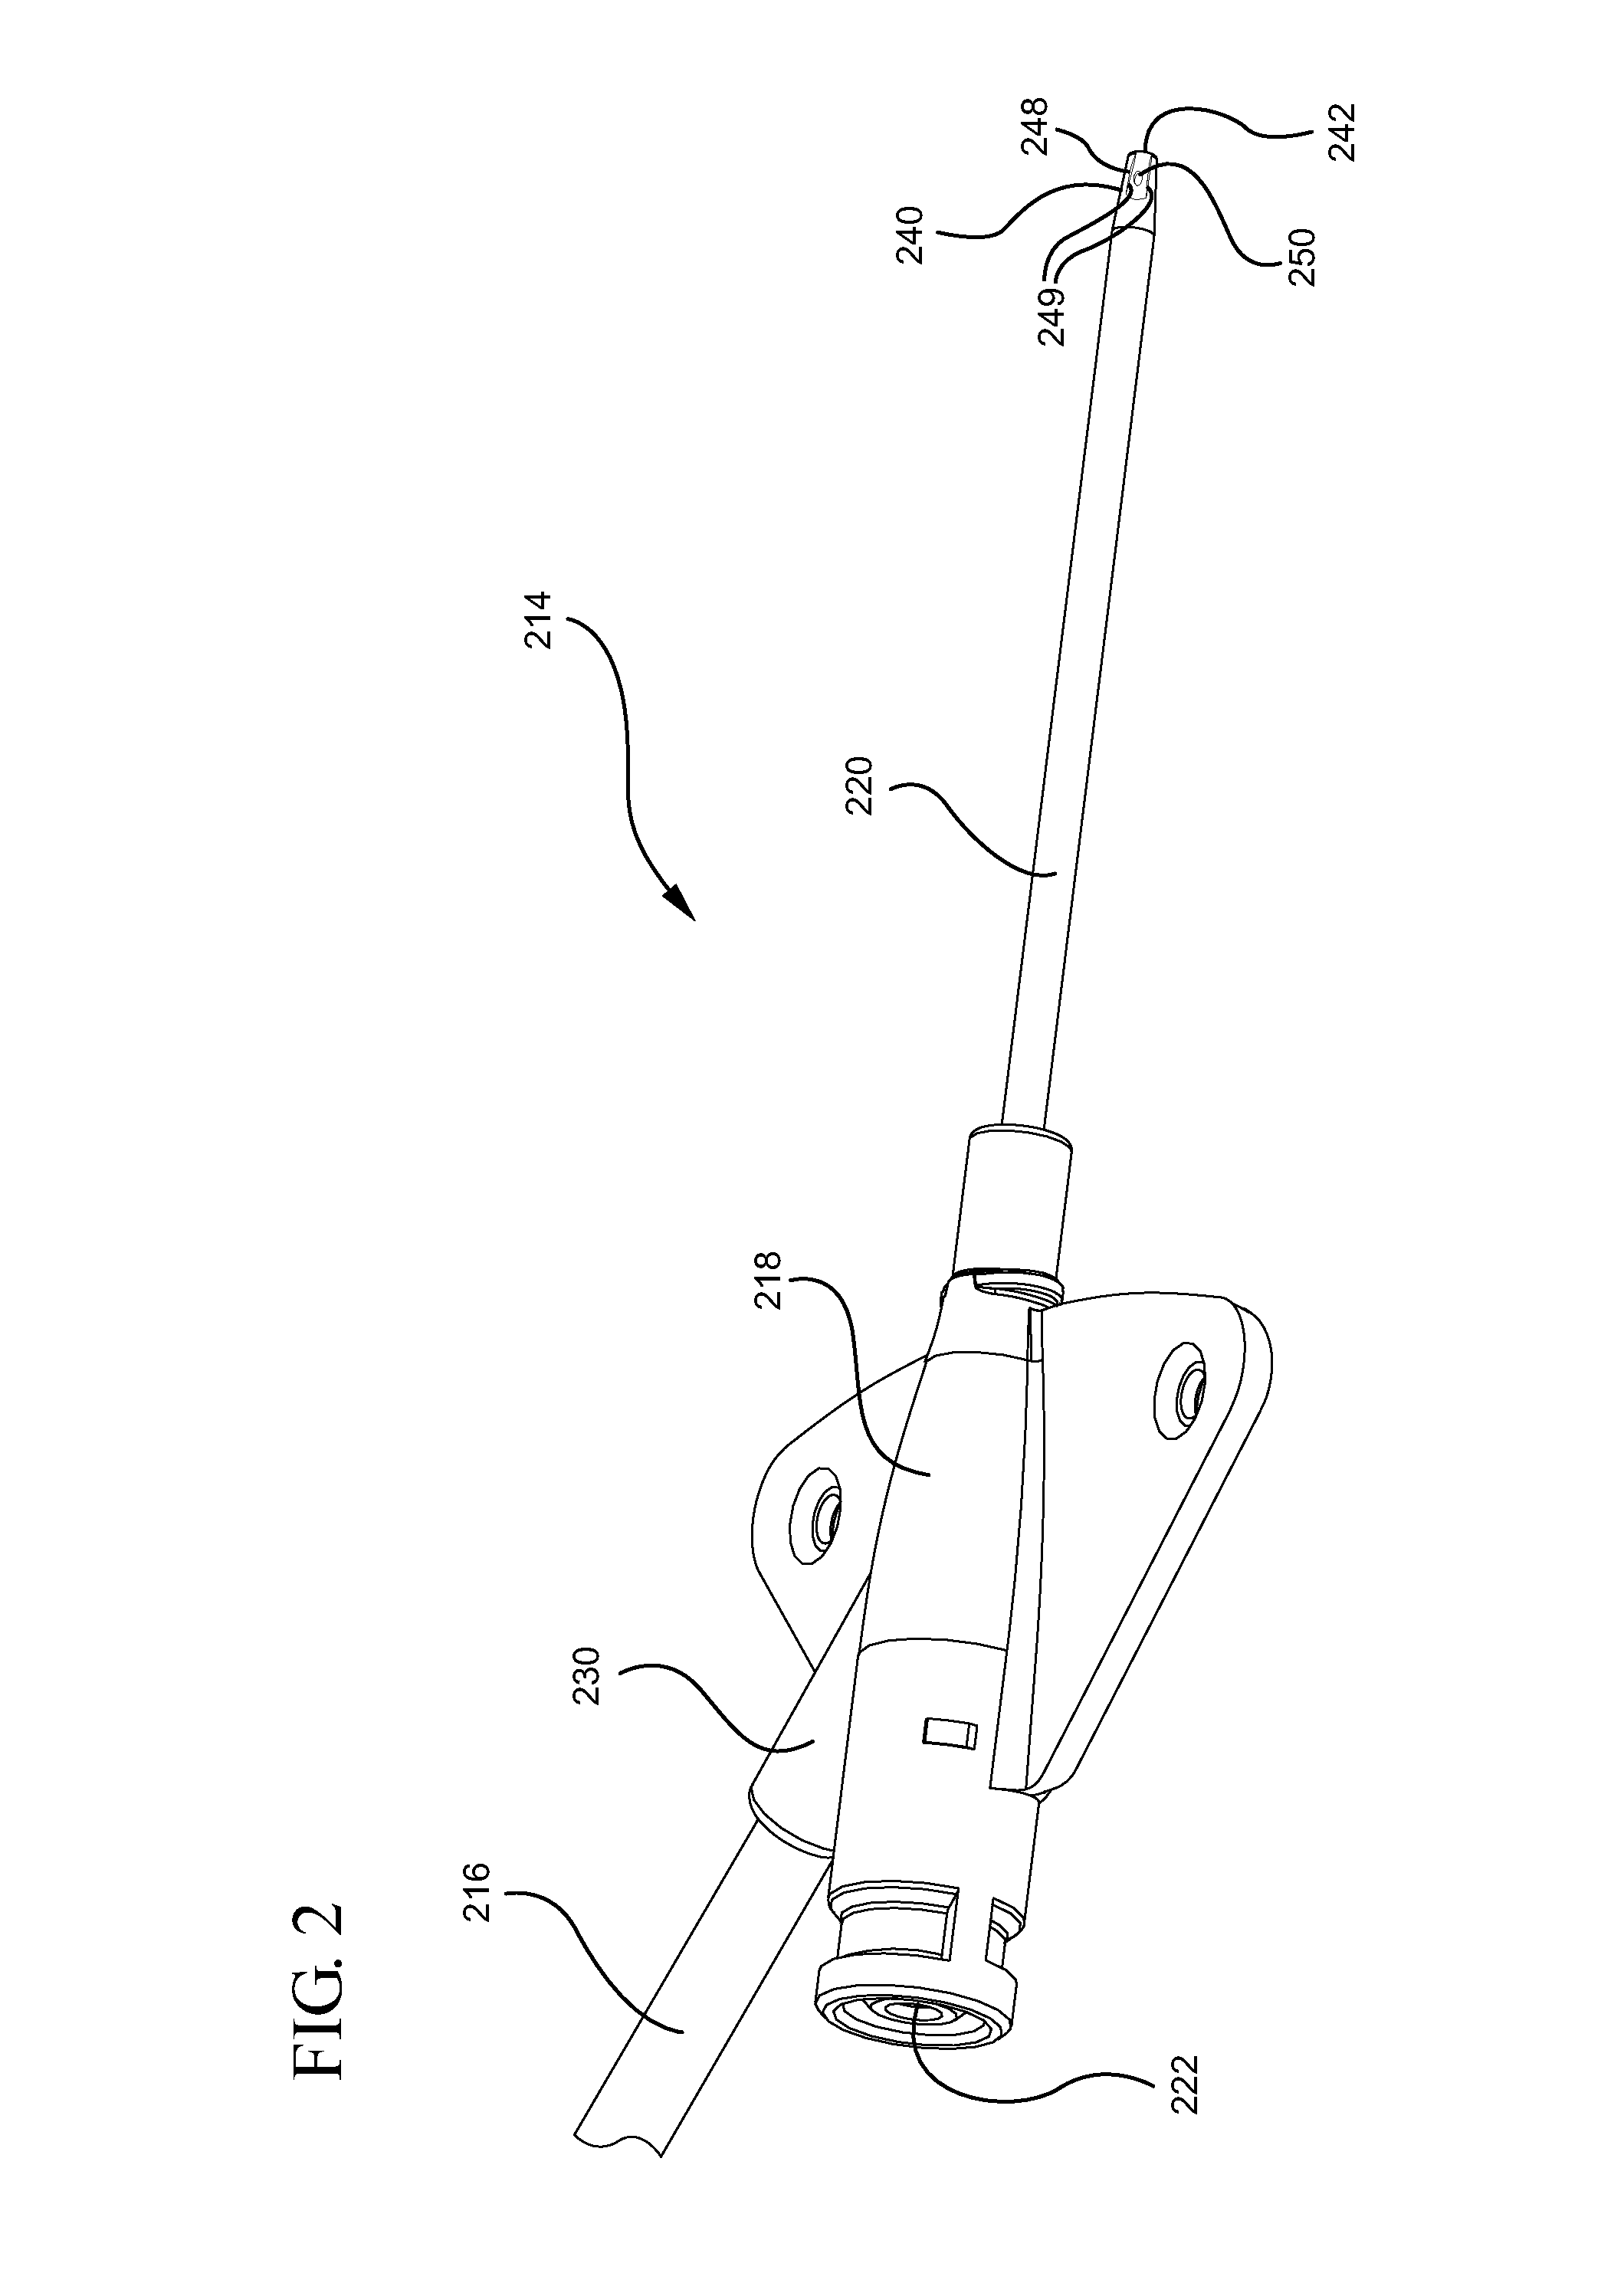 Systems and methods to increase rigidity and snag-resistance of catheter tip